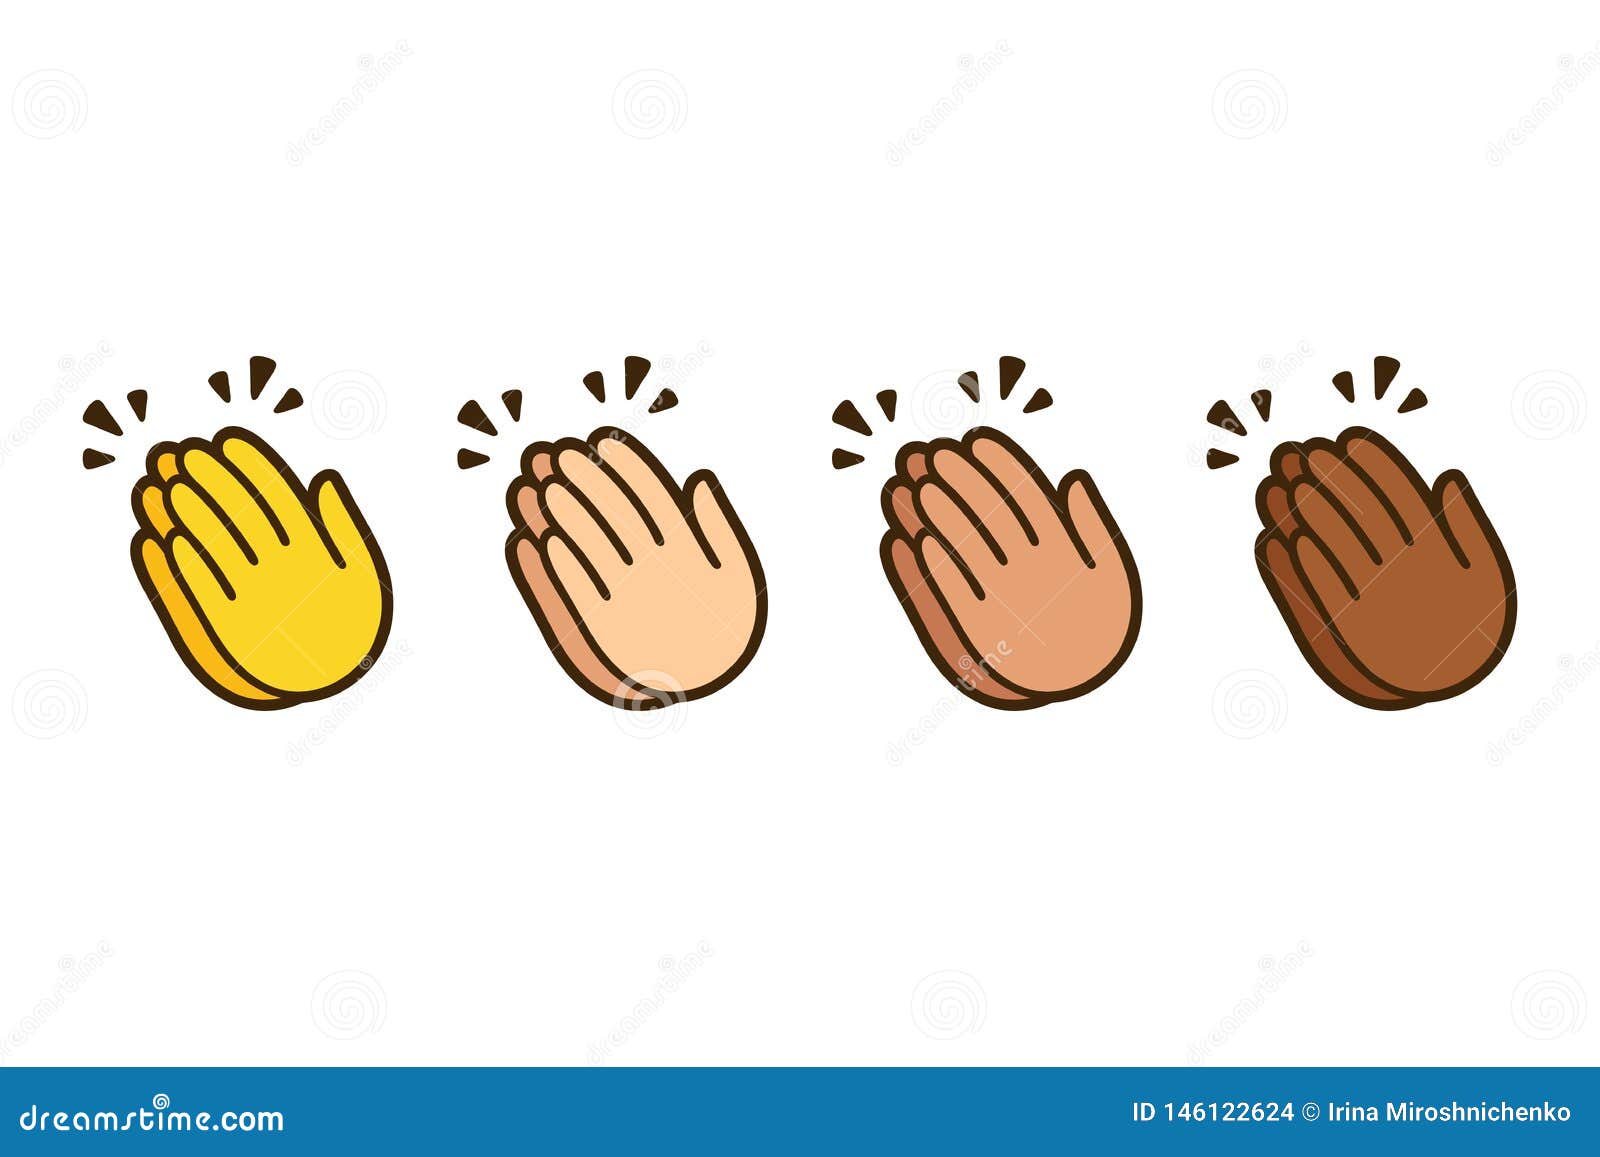 Clapping Hands Stock Illustrations – 2,973 Clapping Hands Stock  Illustrations, Vectors & Clipart - Dreamstime